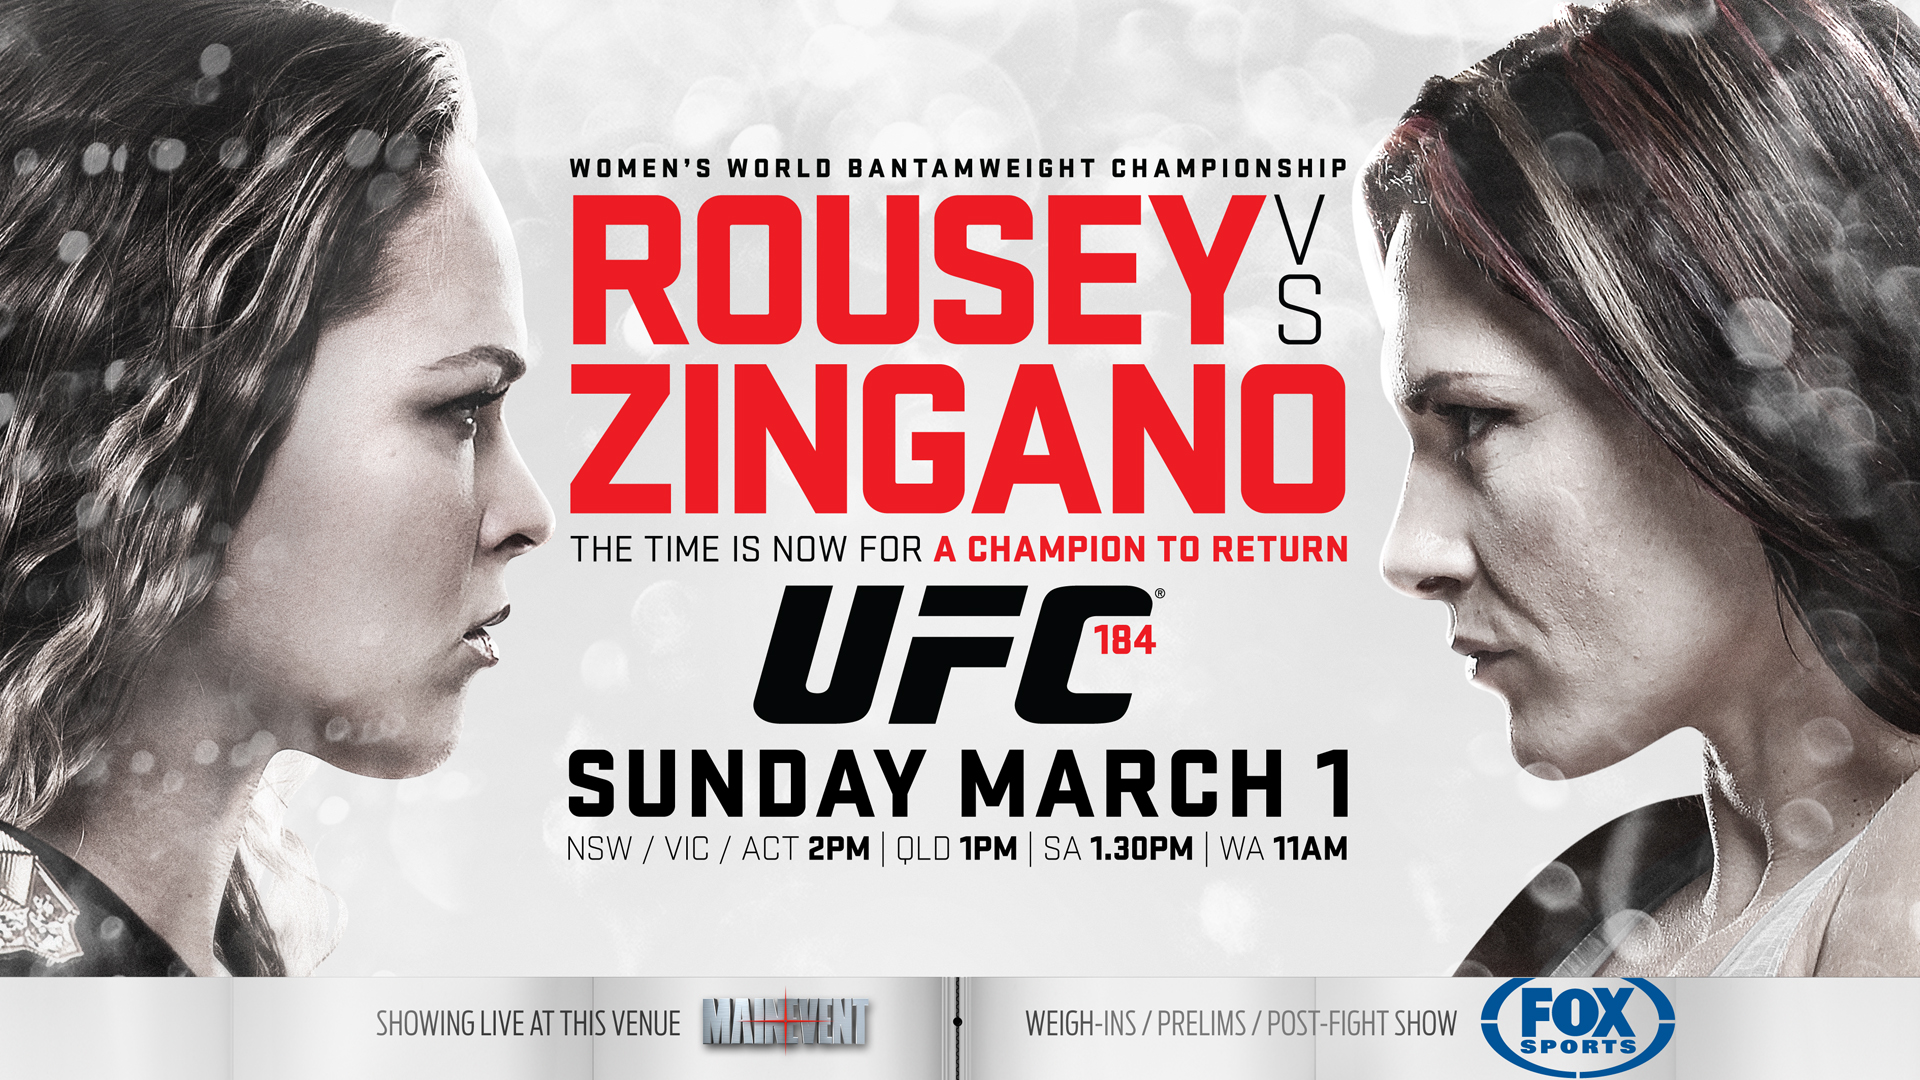 UFC 184: Rousey vs Zingano – Live Results